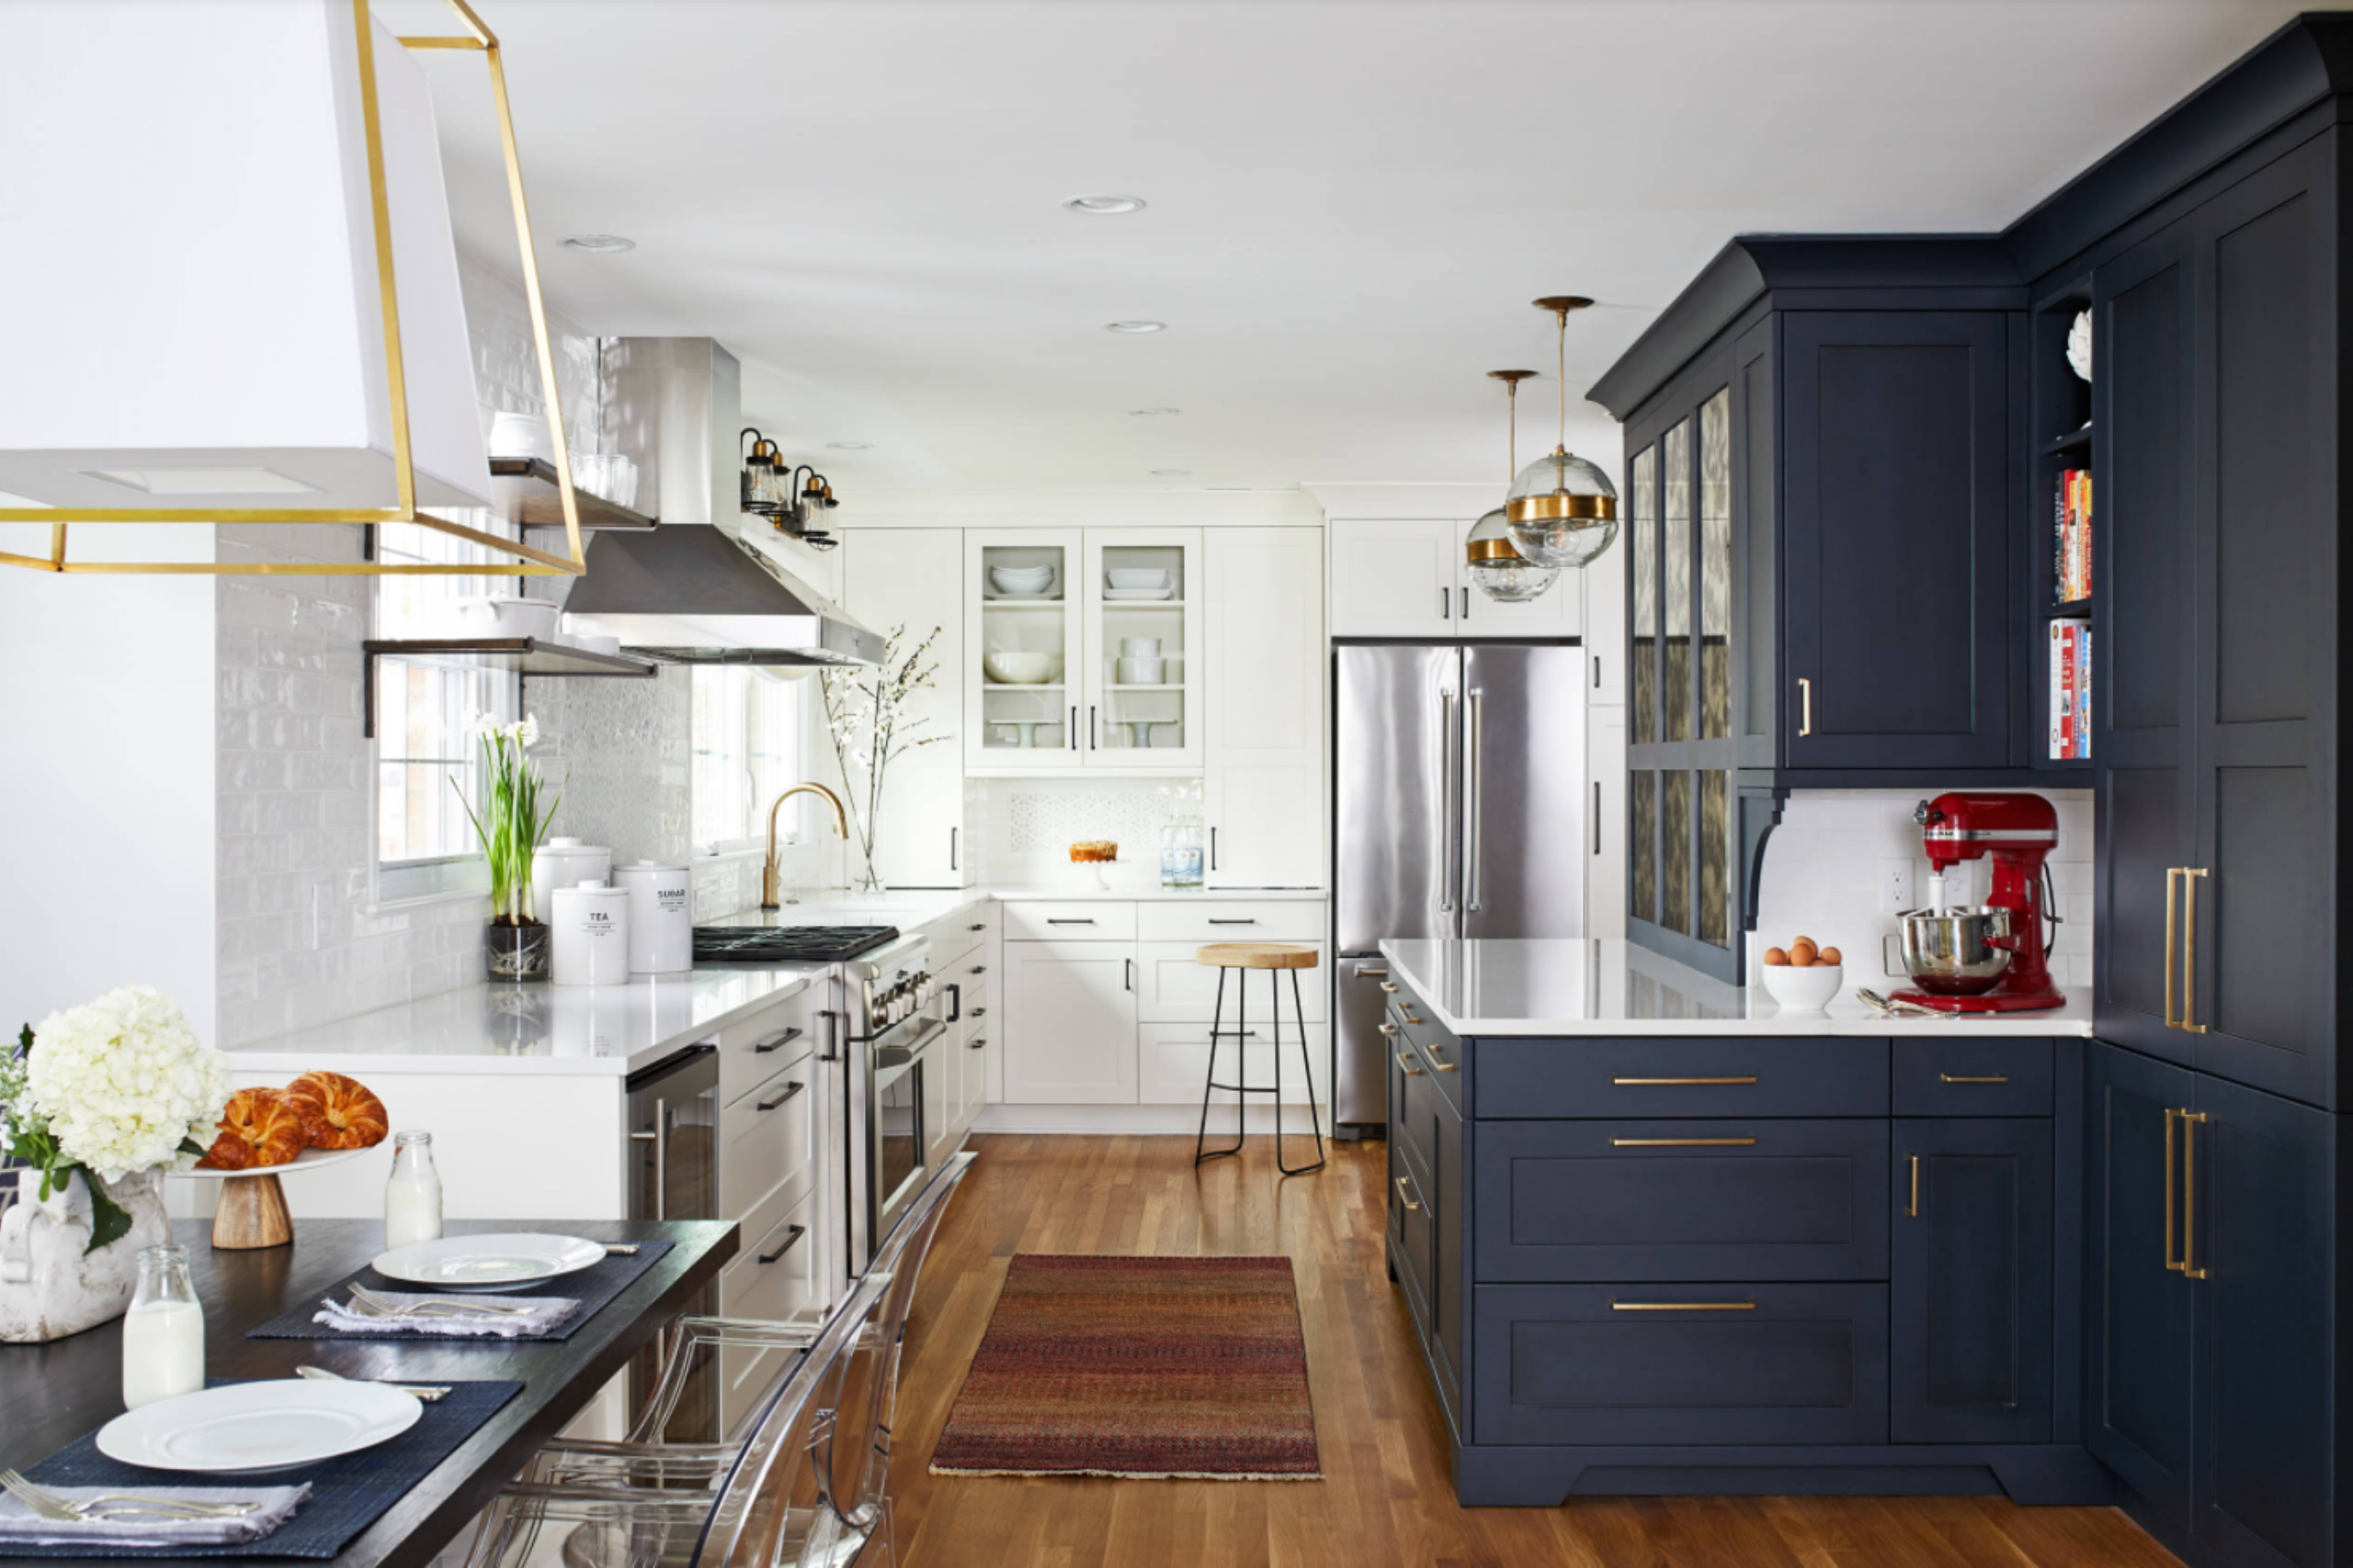 shaker-style-cabinets-are-they-here-to-stay-sebring-design-build